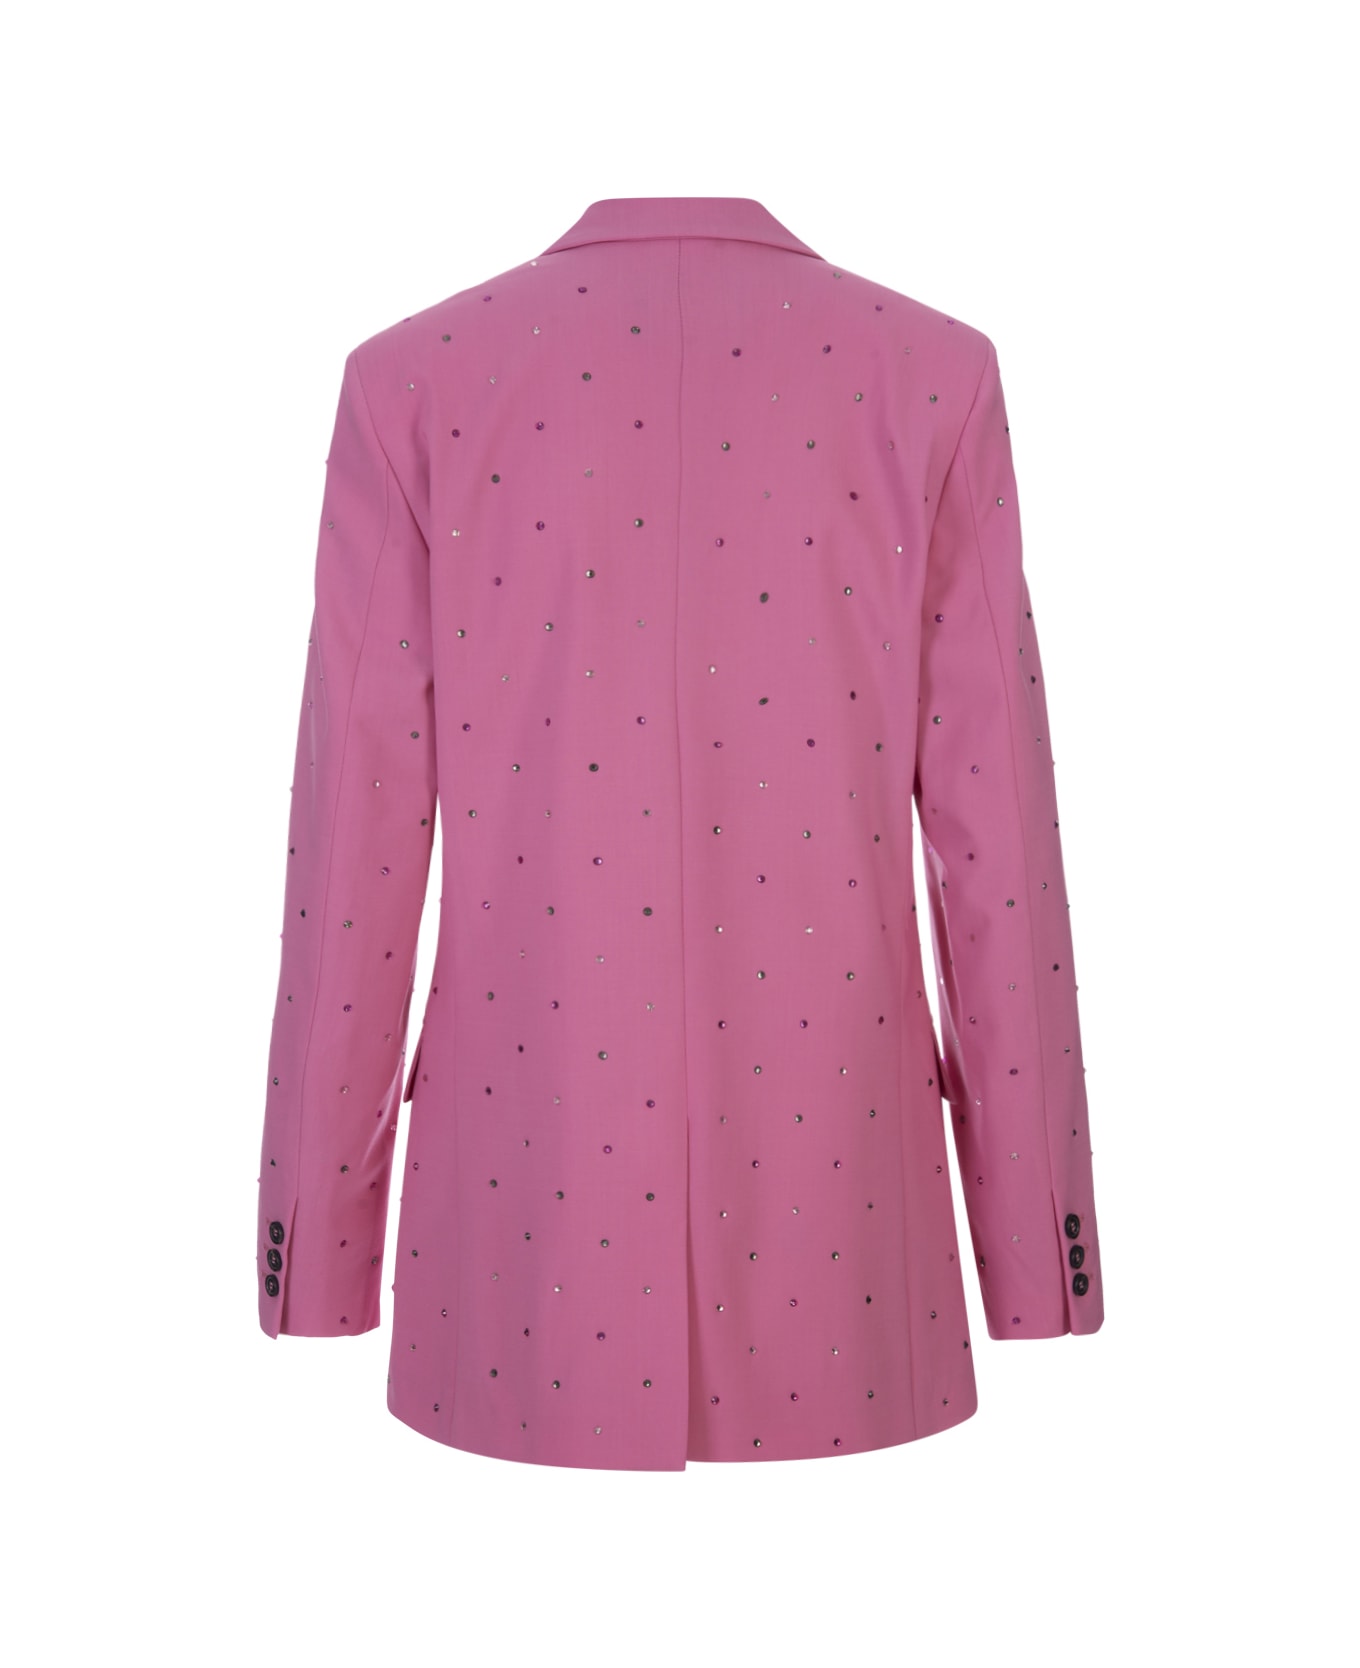 MSGM 'wool Suiting' Jacket In Pink Virgin Wool With Jewelled Applications - Pink ブレザー